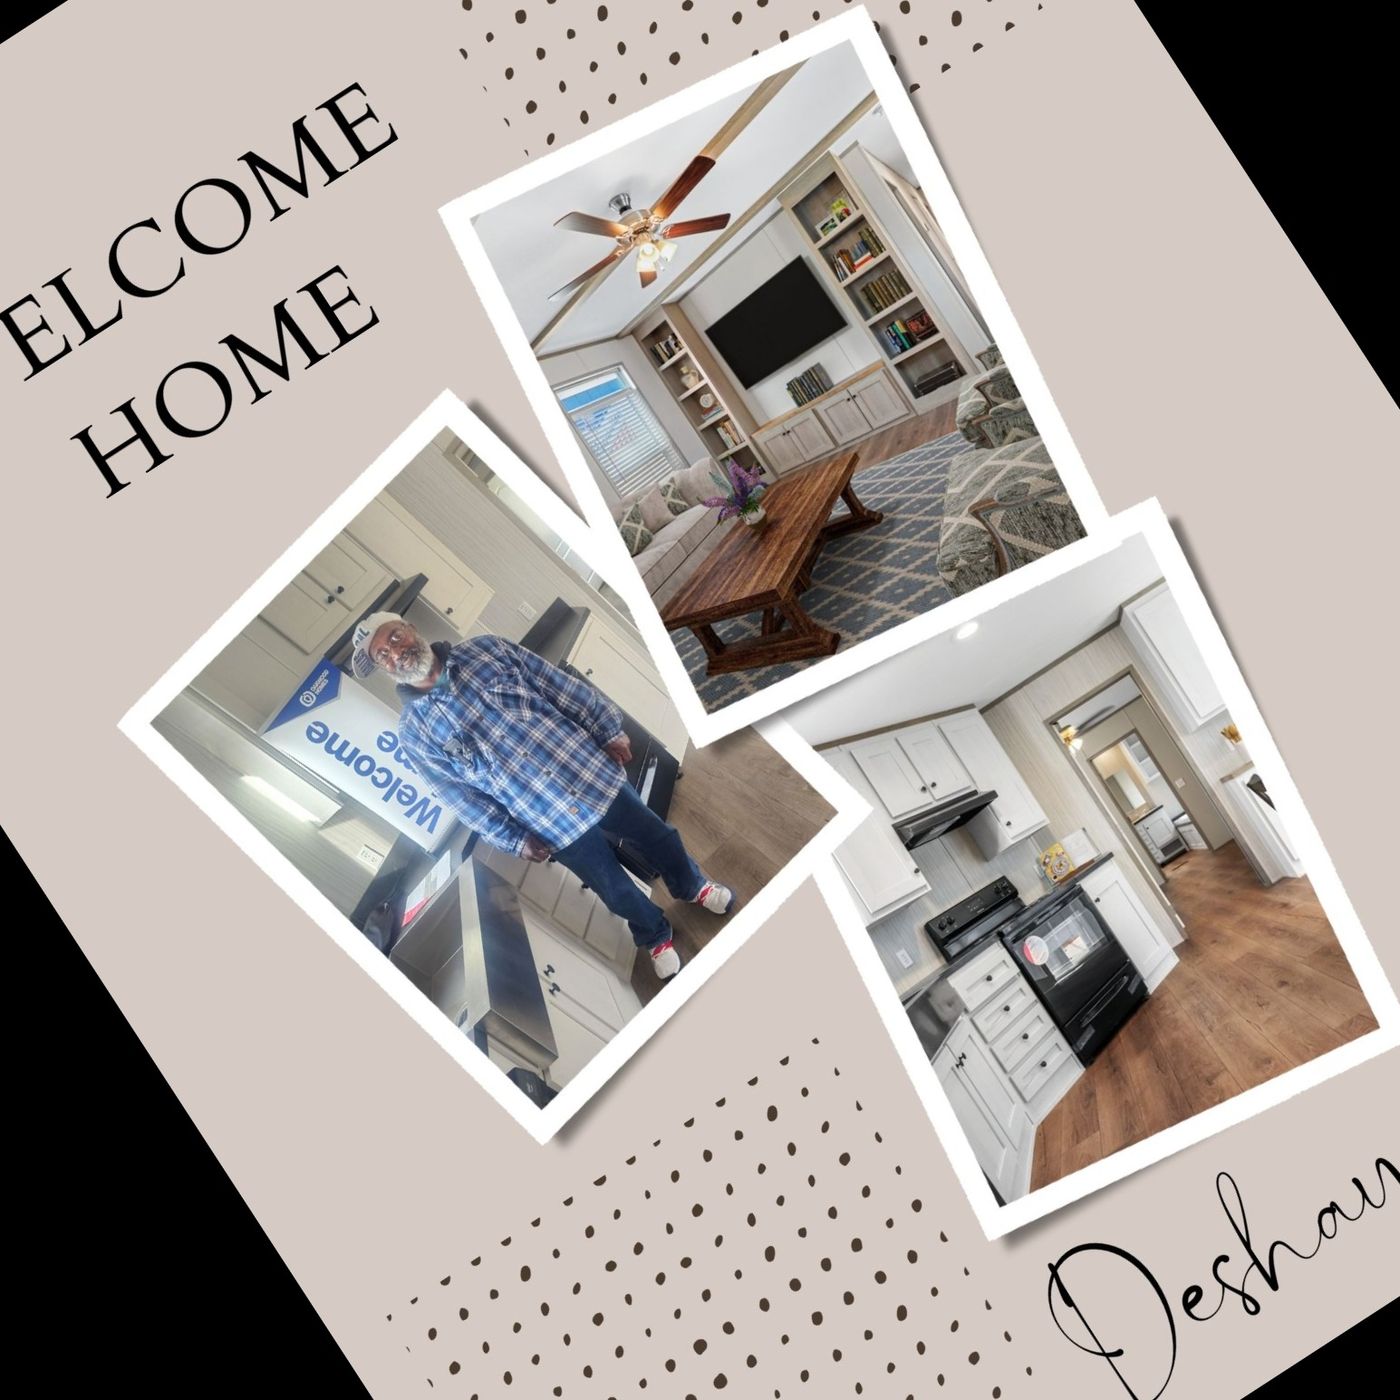 THEOPHALIS D. welcome home image